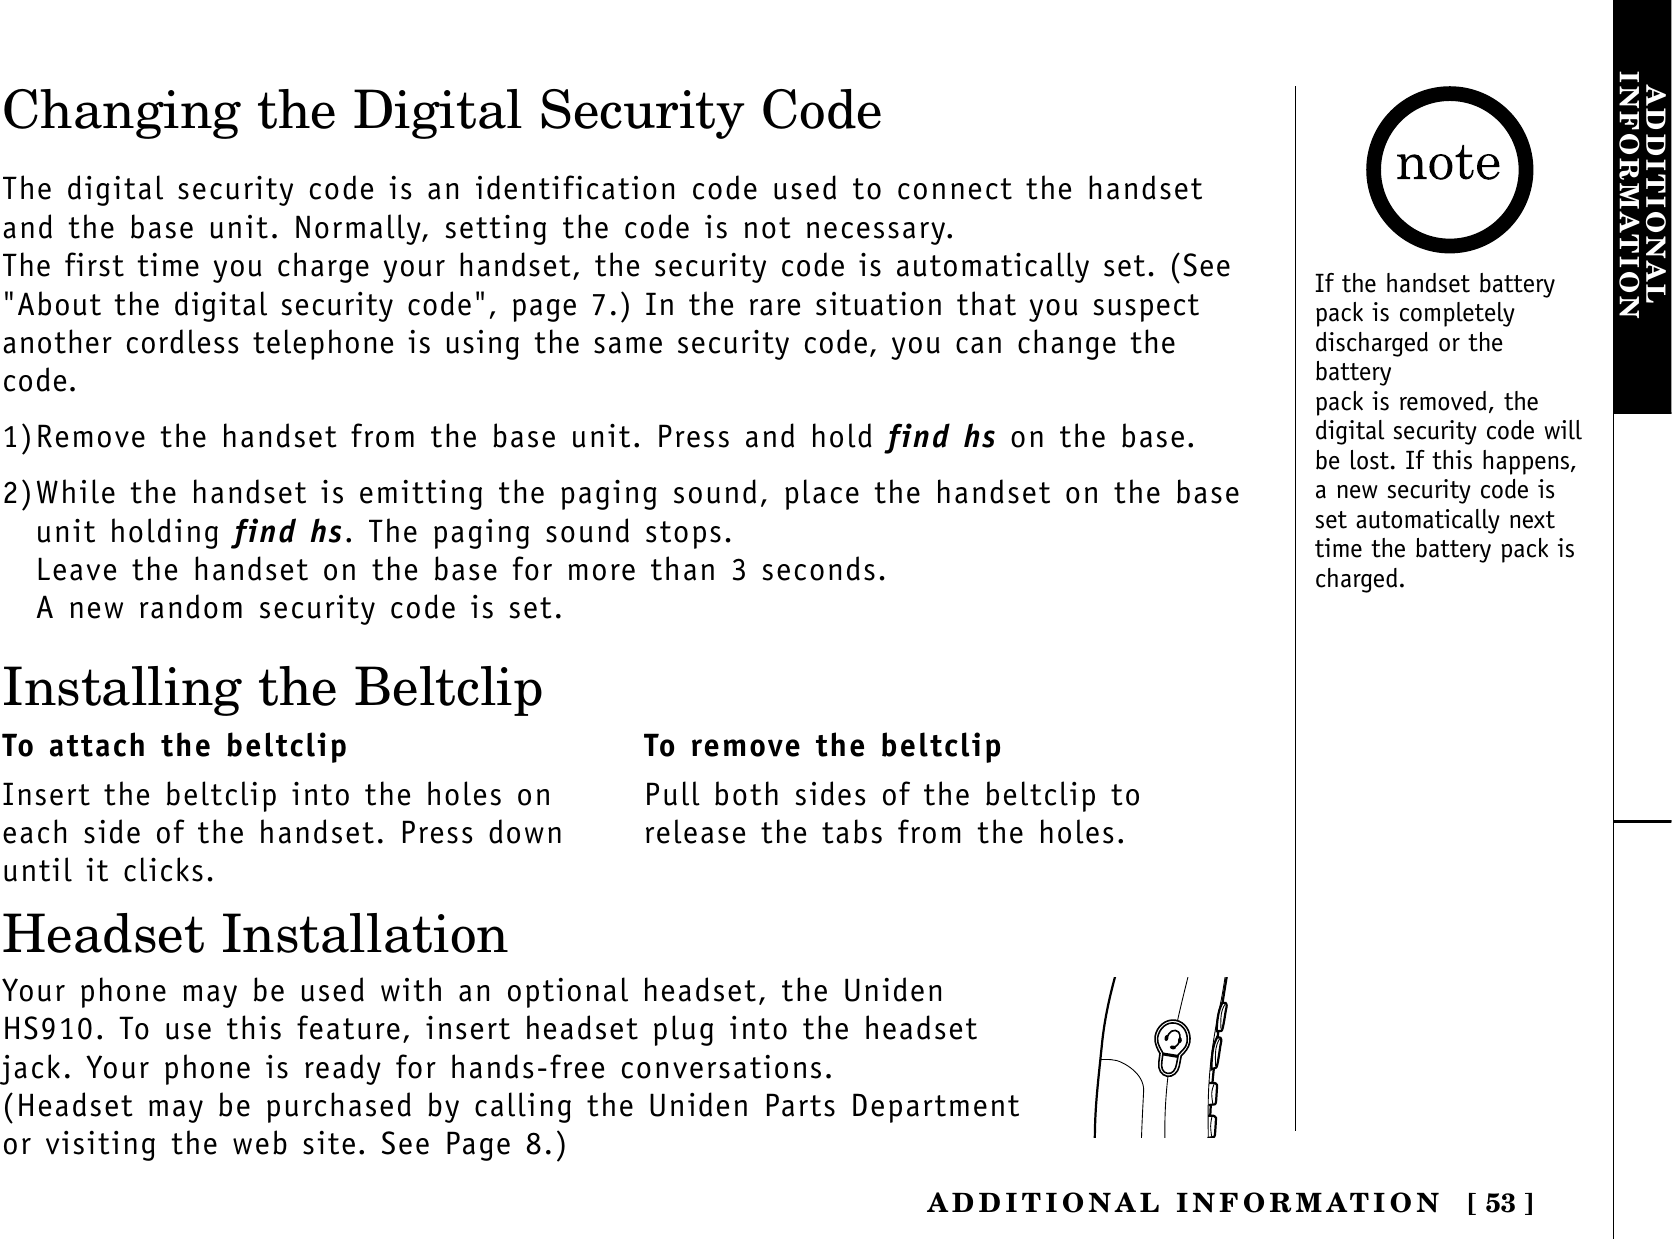 [ 53 ]ADDITIONAL INFORMATIONADDITIONALINFORMATIONChanging the Digital Security CodeThe digital security code is an identification code used to connect the handsetand the base unit. Normally, setting the code is not necessary.The first time you charge your handset, the security code is automatically set. (See&quot;About the digital security code&quot;, page 7.) In the rare situation that you suspectanother cordless telephone is using the same security code, you can change thecode.1)Remove the handset from the base unit. Press and hold find hs on the base.2)While the handset is emitting the paging sound, place the handset on the baseunit holding find hs. The paging sound stops.Leave the handset on the base for more than 3 seconds.A new random security code is set.Installing the BeltclipTo attach the beltclipInsert the beltclip into the holes oneach side of the handset. Press downuntil it clicks.To remove the beltclipPull both sides of the beltclip torelease the tabs from the holes.Your phone may be used with an optional headset, the UnidenHS910. To use this feature, insert headset plug into the headsetjack. Your phone is ready for hands-free conversations.(Headset may be purchased by calling the Uniden Parts Departmentor visiting the web site. See Page 8.)Headset InstallationIf the handset batterypack is completelydischarged or thebatterypack is removed, thedigital security code willbe lost. If this happens,a new security code isset automatically nexttime the battery pack ischarged.